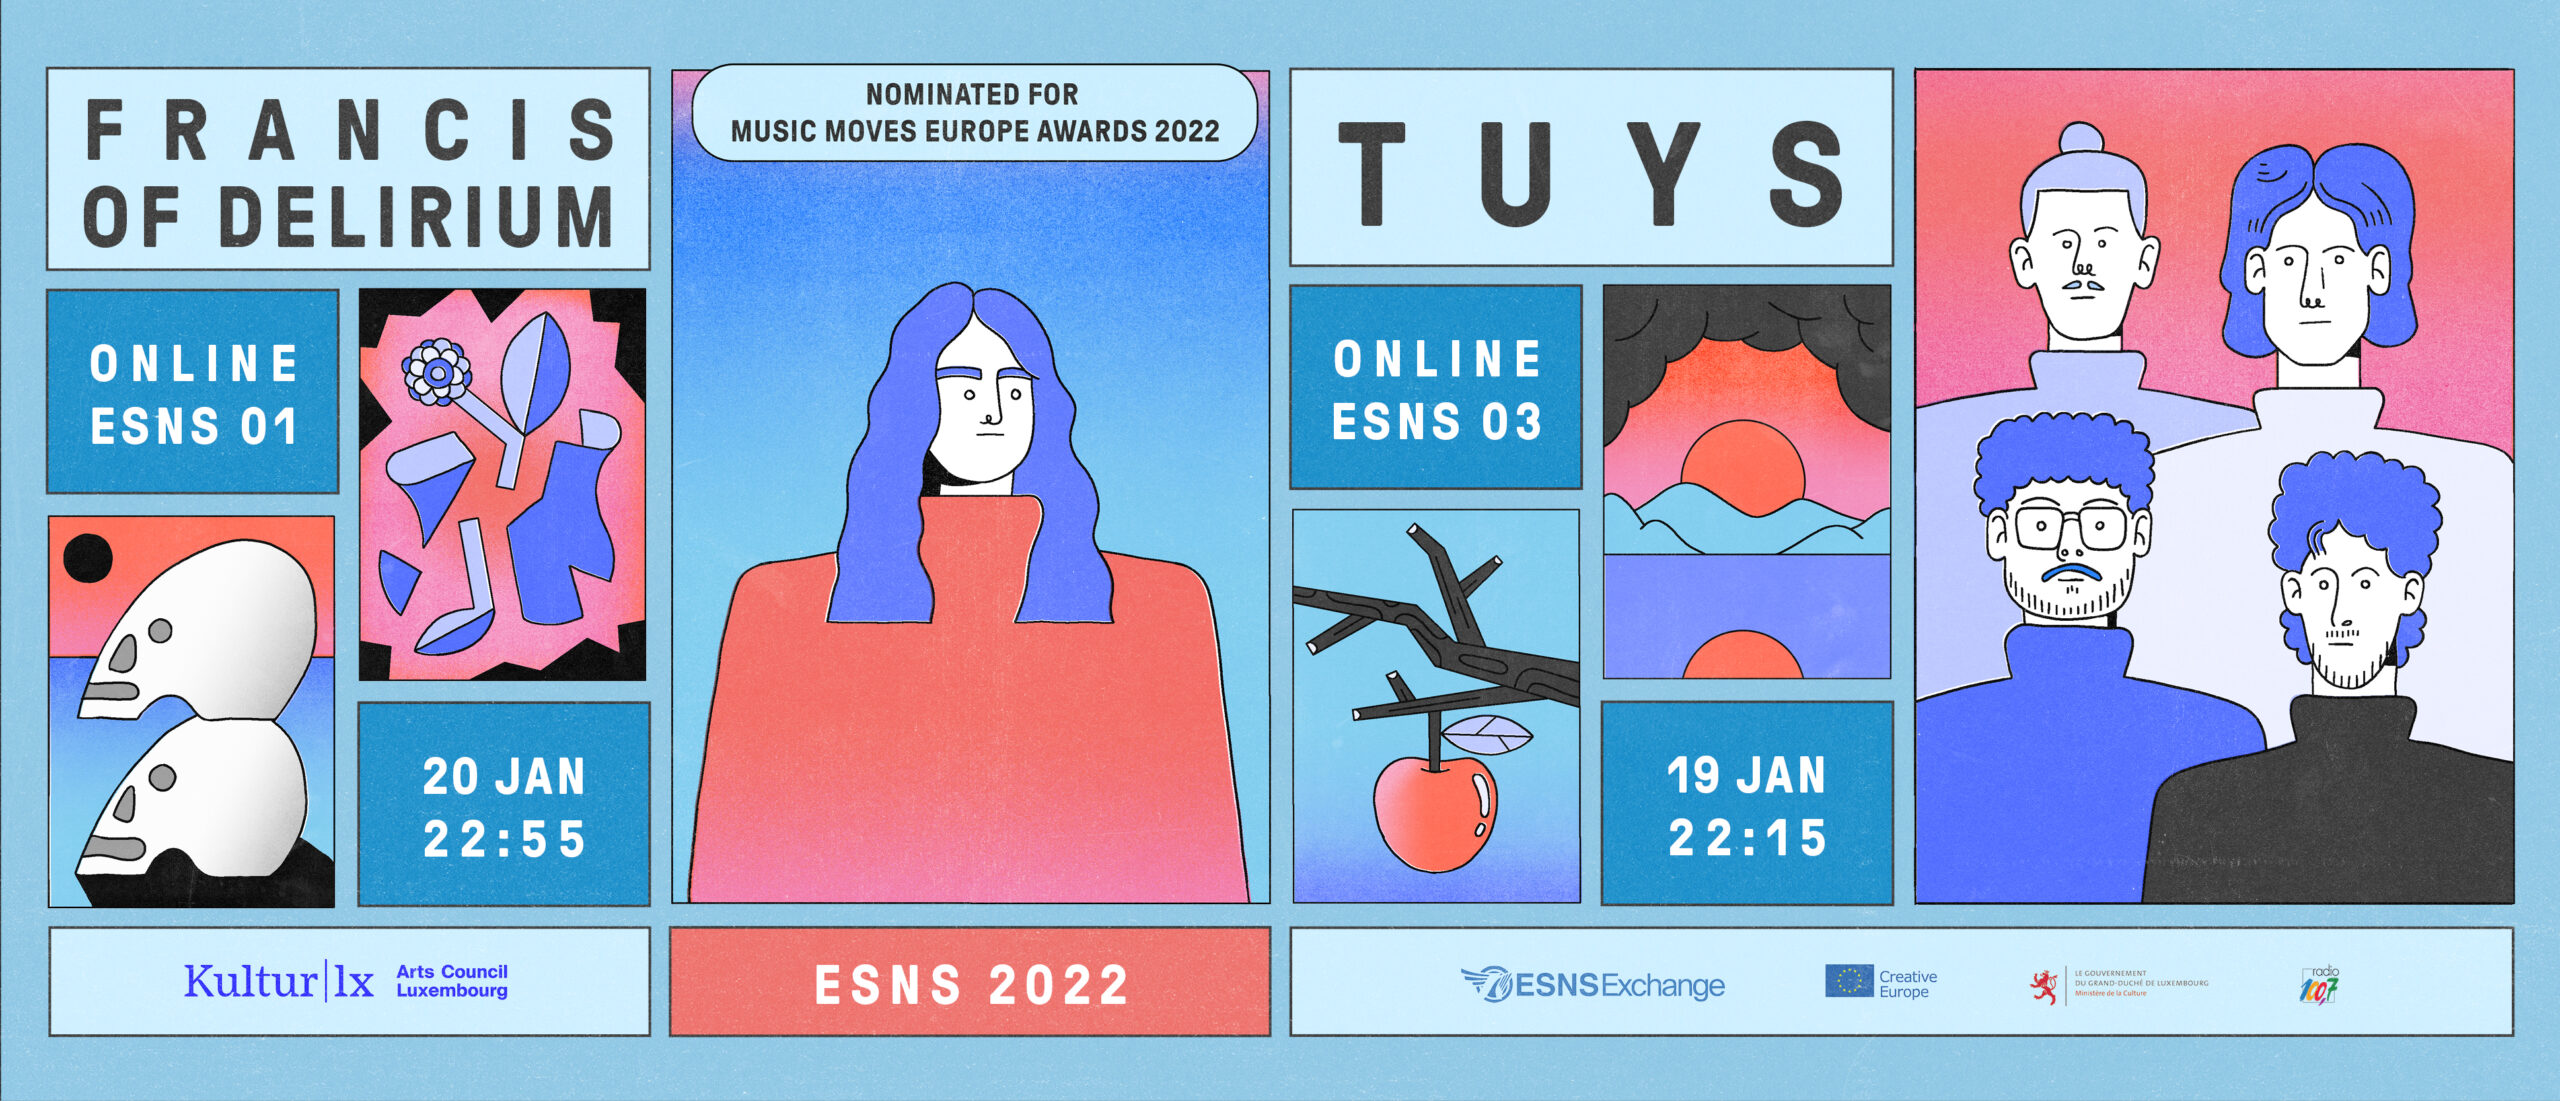 ESNS22 : Francis of Delirium and TUYS to rock Eurosonic this week!